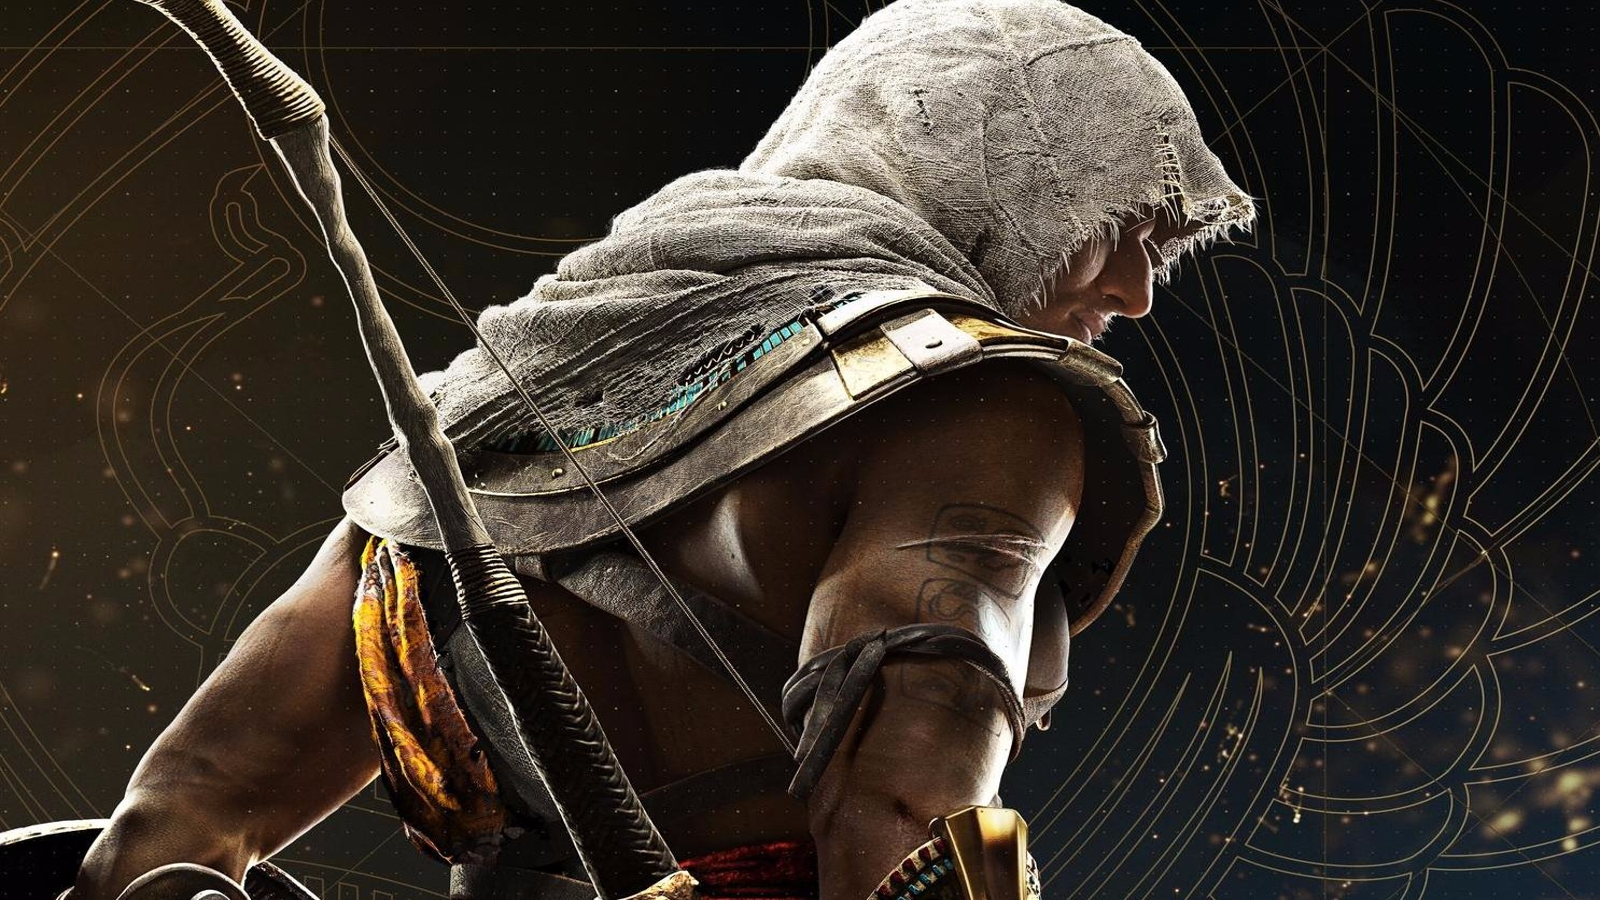 Assassin's Creed Origins on Xbox One X: can third parties hit 4K